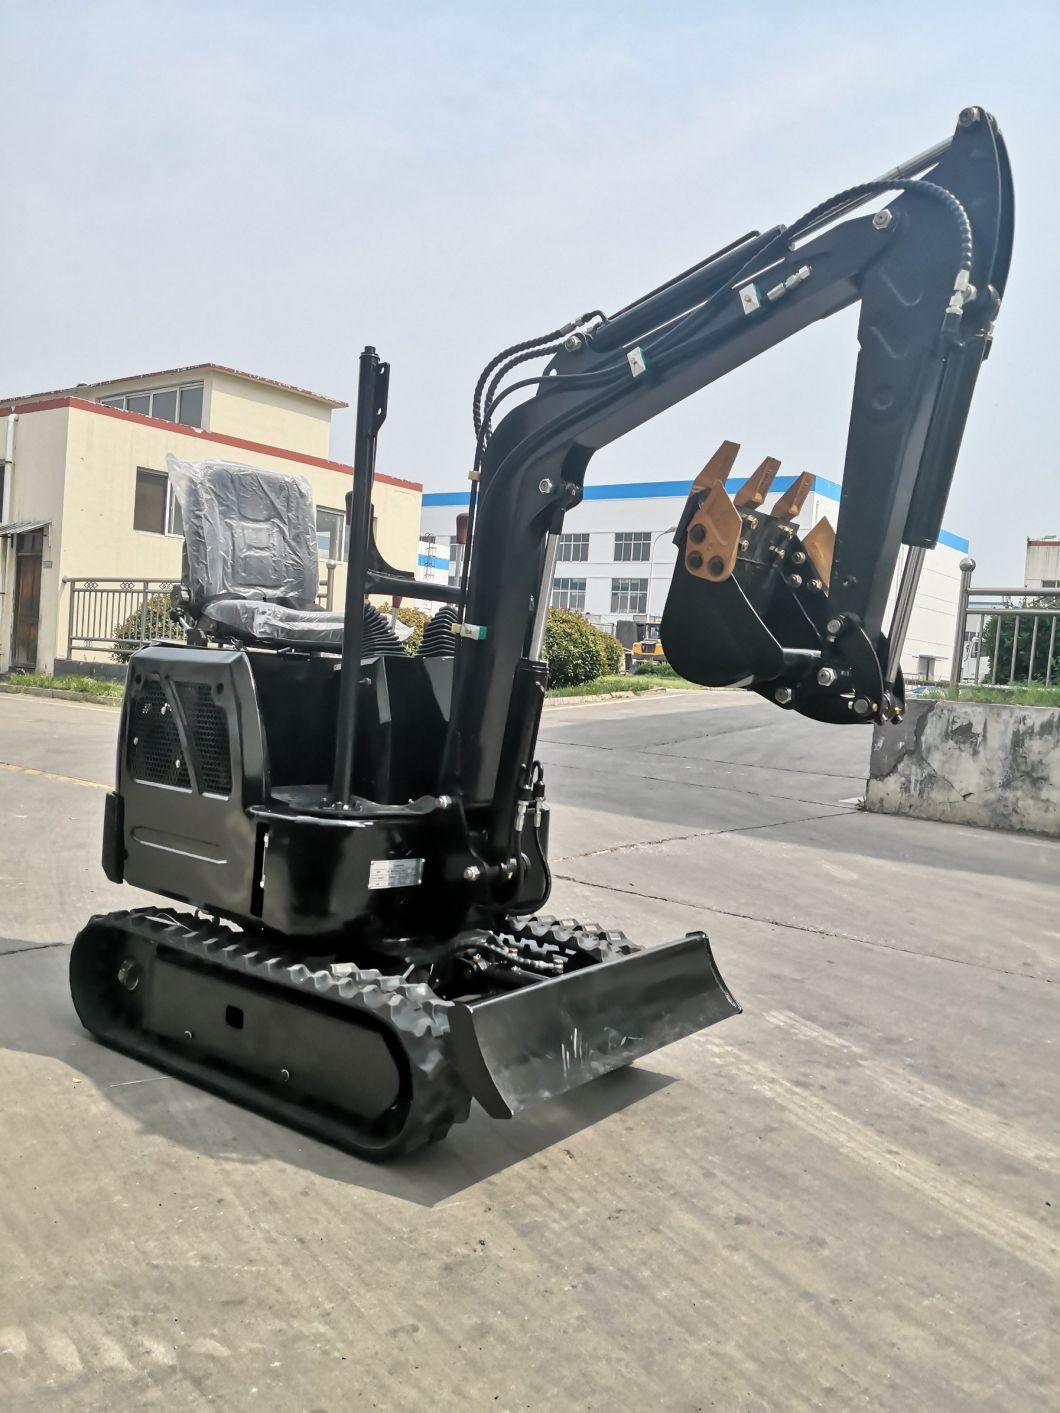 Price of China Made Hydraulic Portable Backhoe Excavator 1000kg